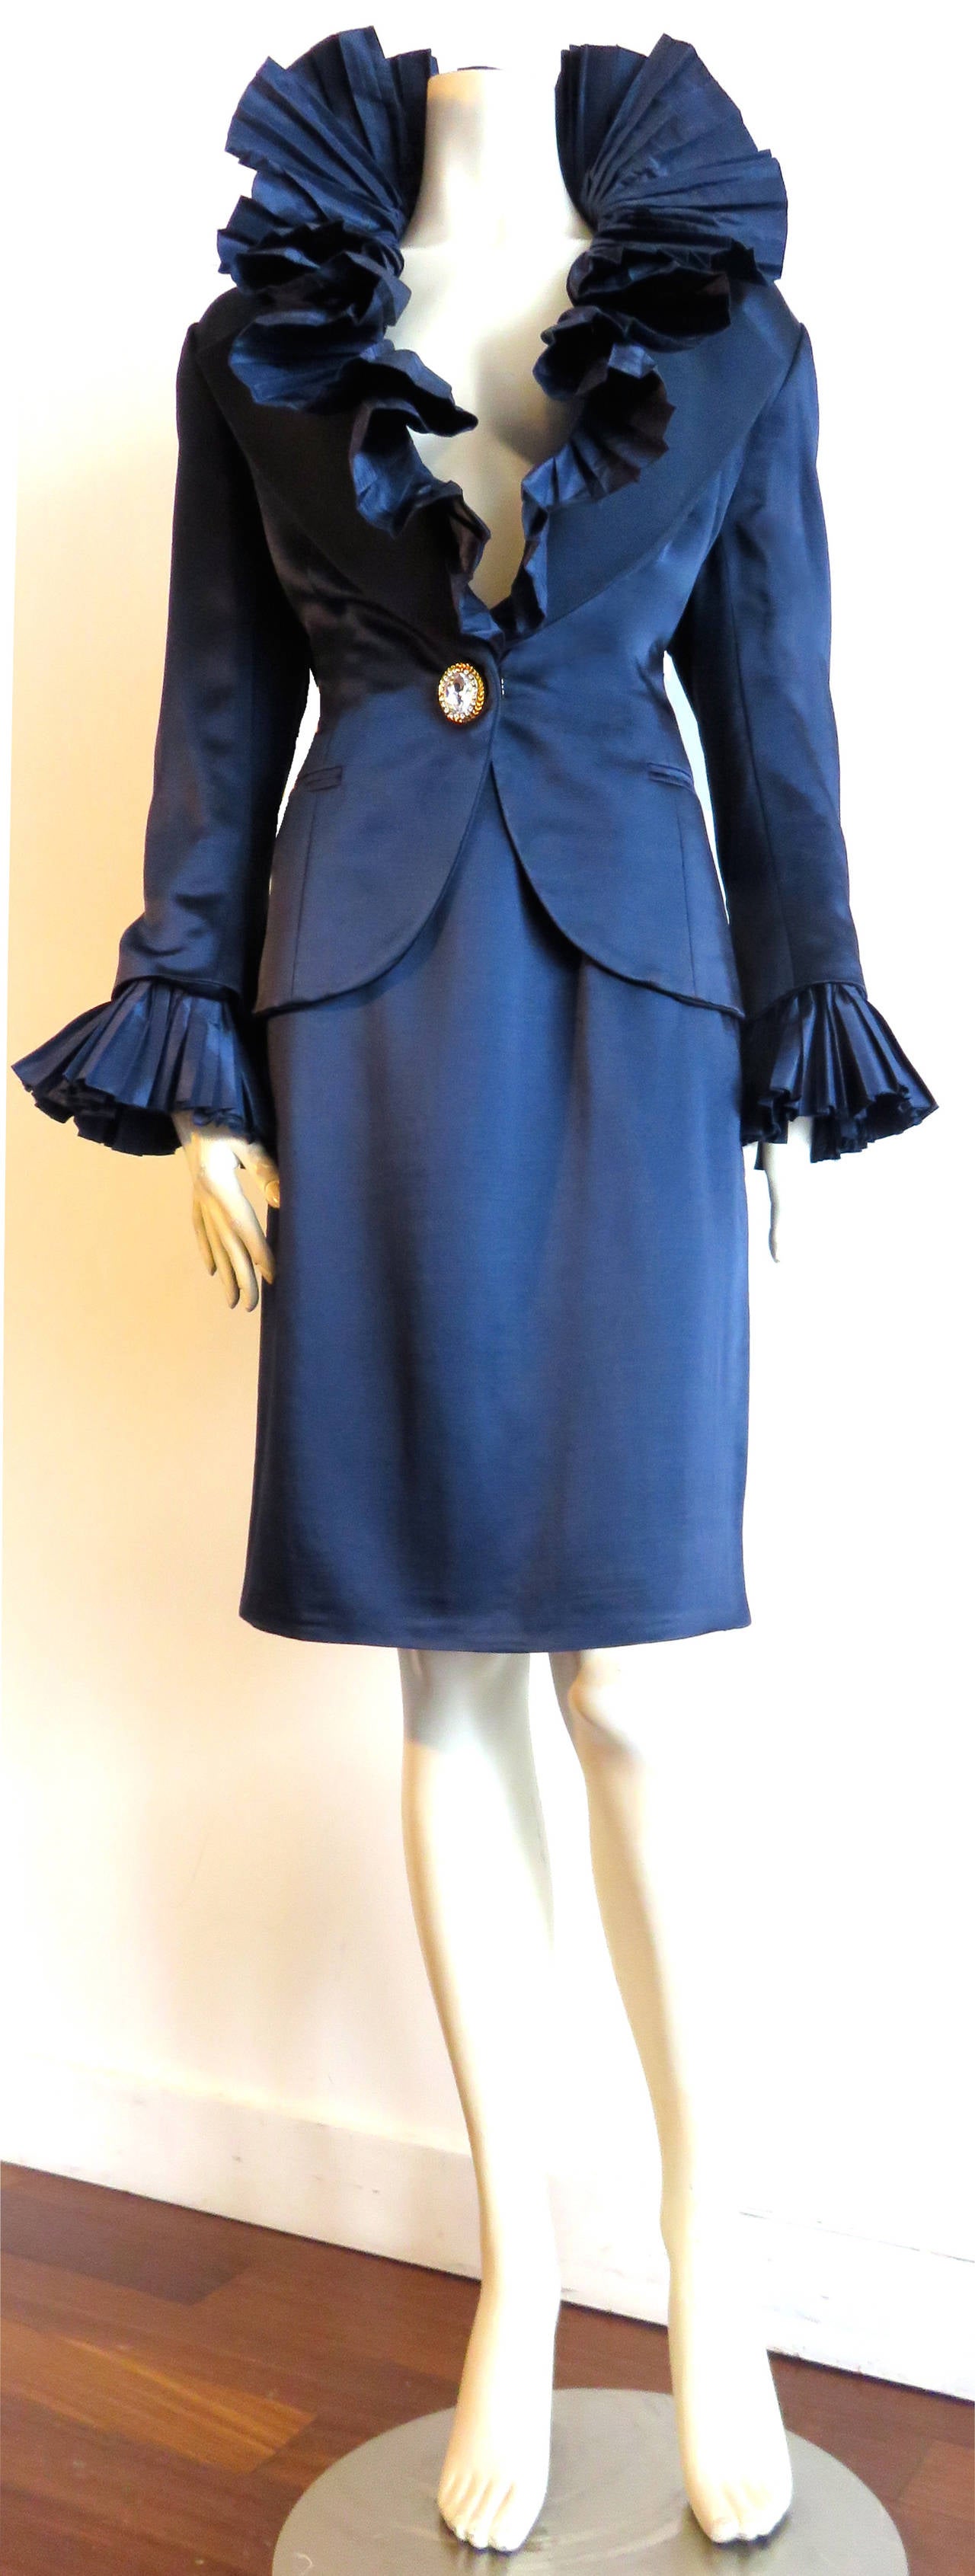 Amazing, CHRISTIAN DIOR by Gianfranco Ferré blue satin & taffeta skirt suit with dramatic, fan collar and cuff details.

Ultra-Lux, satin fabrication with a beautiful, silky sheen.  

Dramatic, accordion-pleated taffeta, collar and cuff detail. 